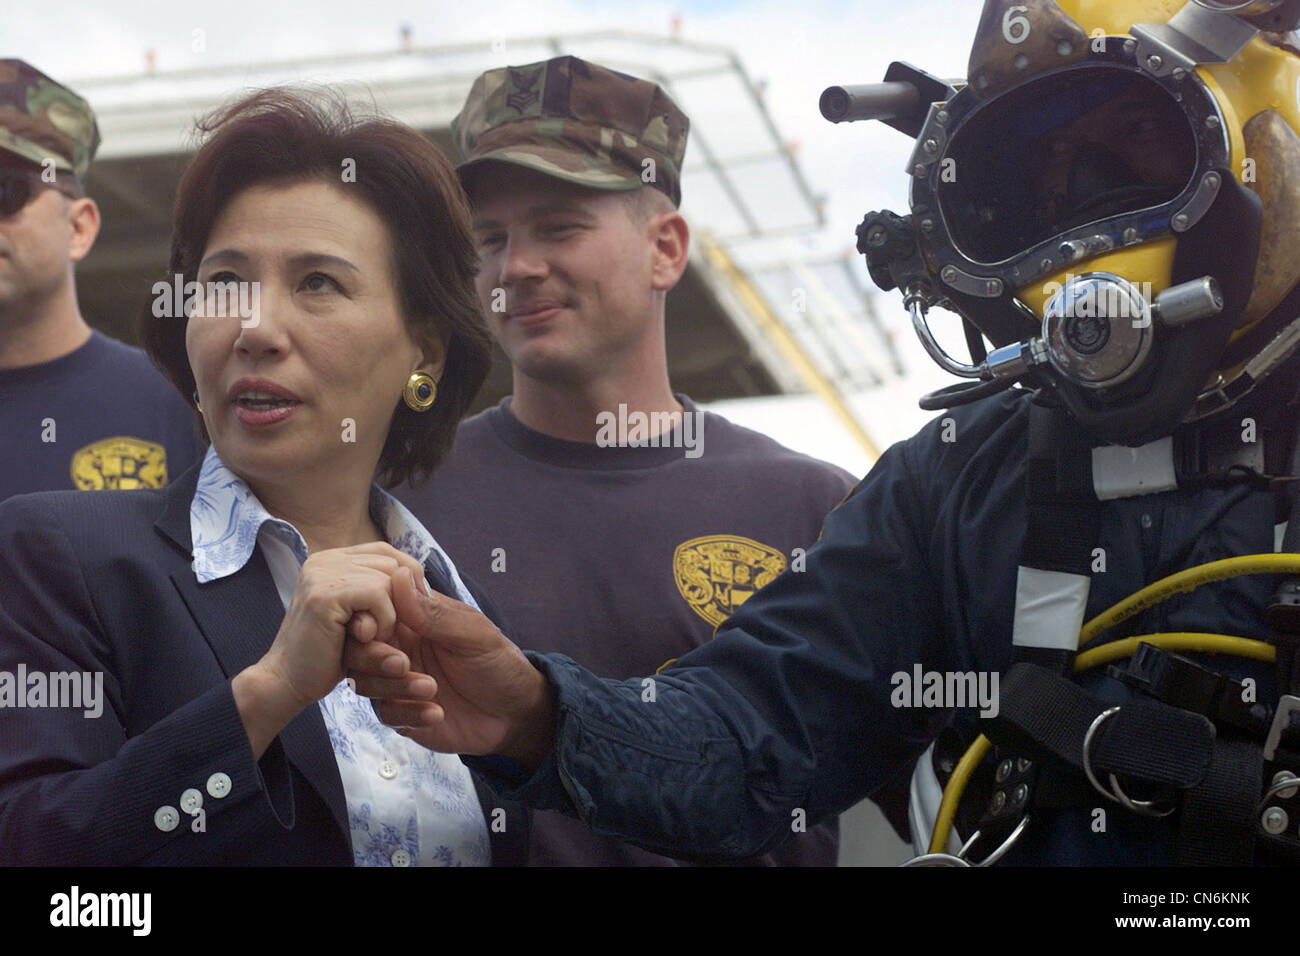 Her Excellency Makiko Tanaka, Minister of Foreign Affairs, Japan, shakes hands with US Navy (USN) Chief Boatswain’s Mate (BMC), Diver (DV) Robert Lastimosa, from Mobile Diving and Salvage Unit One (MDSU-1) after he presents her with a Navy divers coin. Mrs. Tanaka came to lend her support and received an update on the USN led effort during recovery operations for the Japanese fishing vessel Ehime Maru. Stock Photo